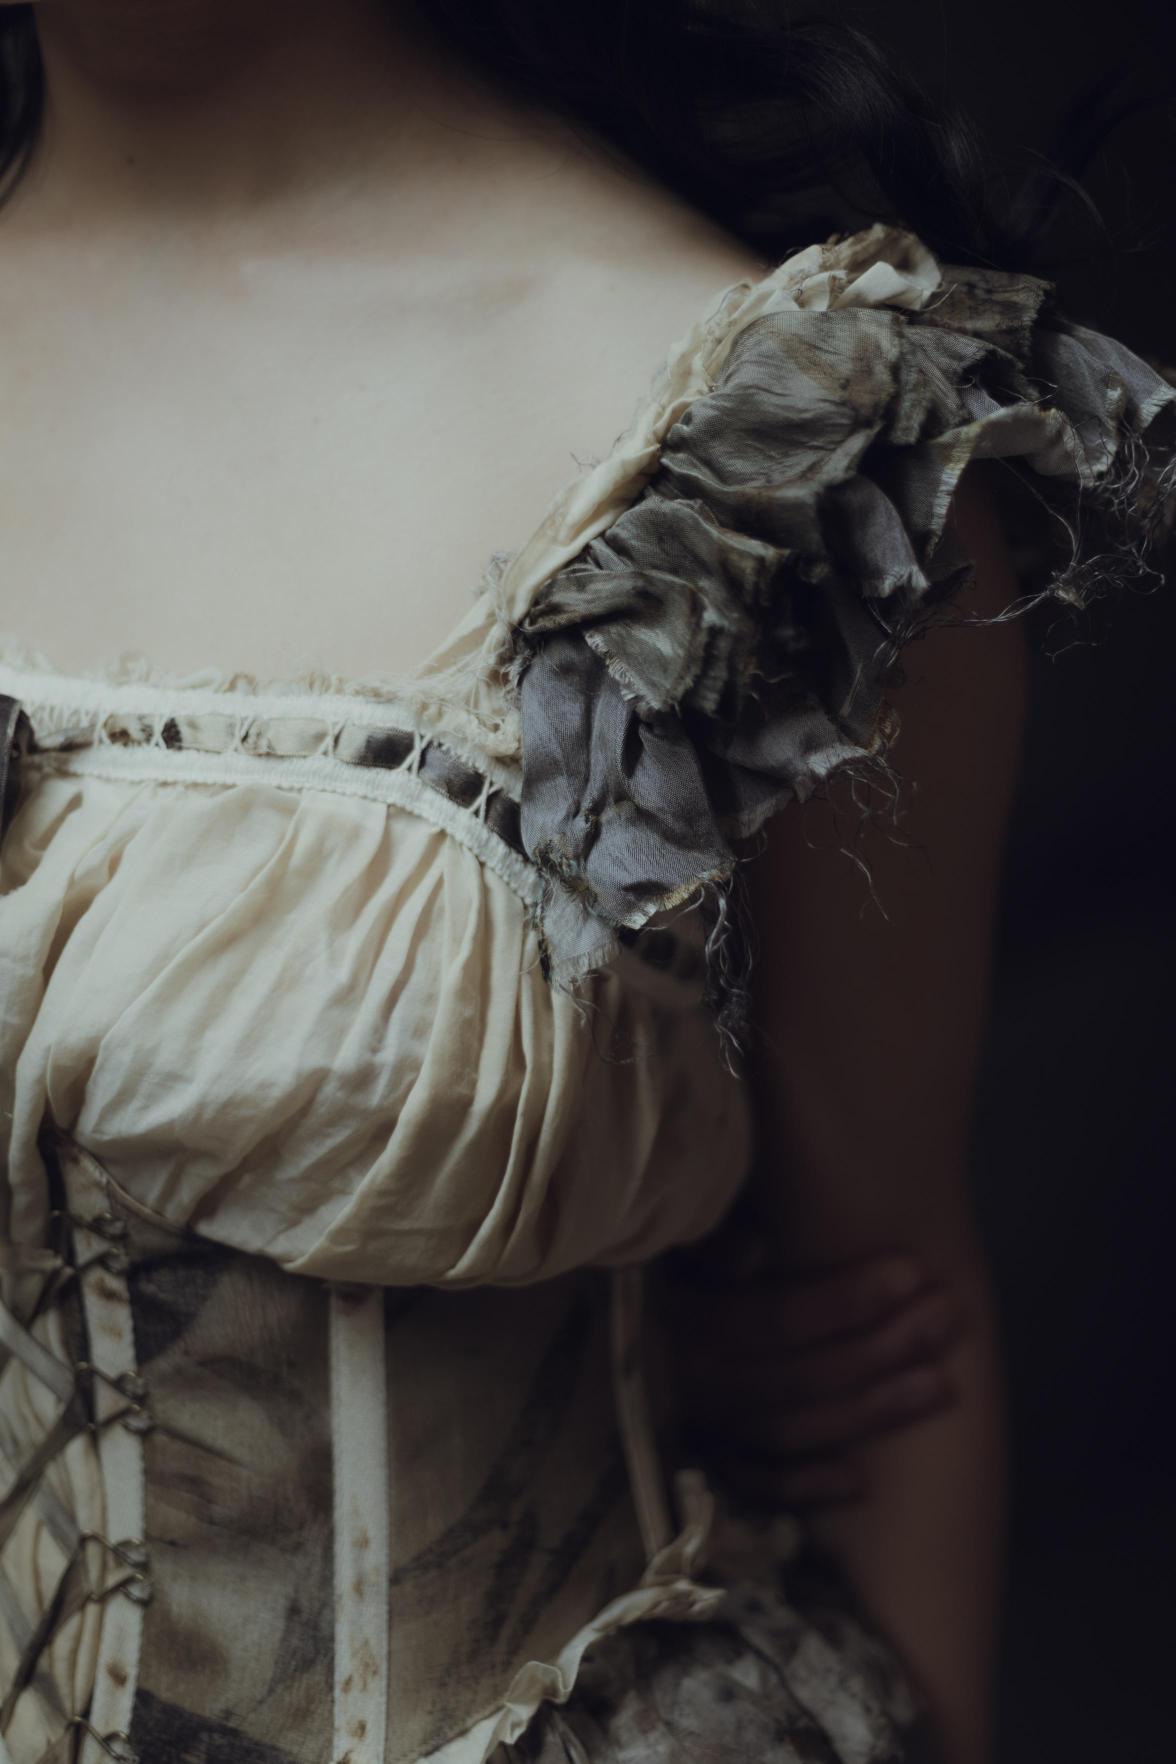 A close-up of a woman's shoulder, wearing a frayed antique dress with intricate lacing.